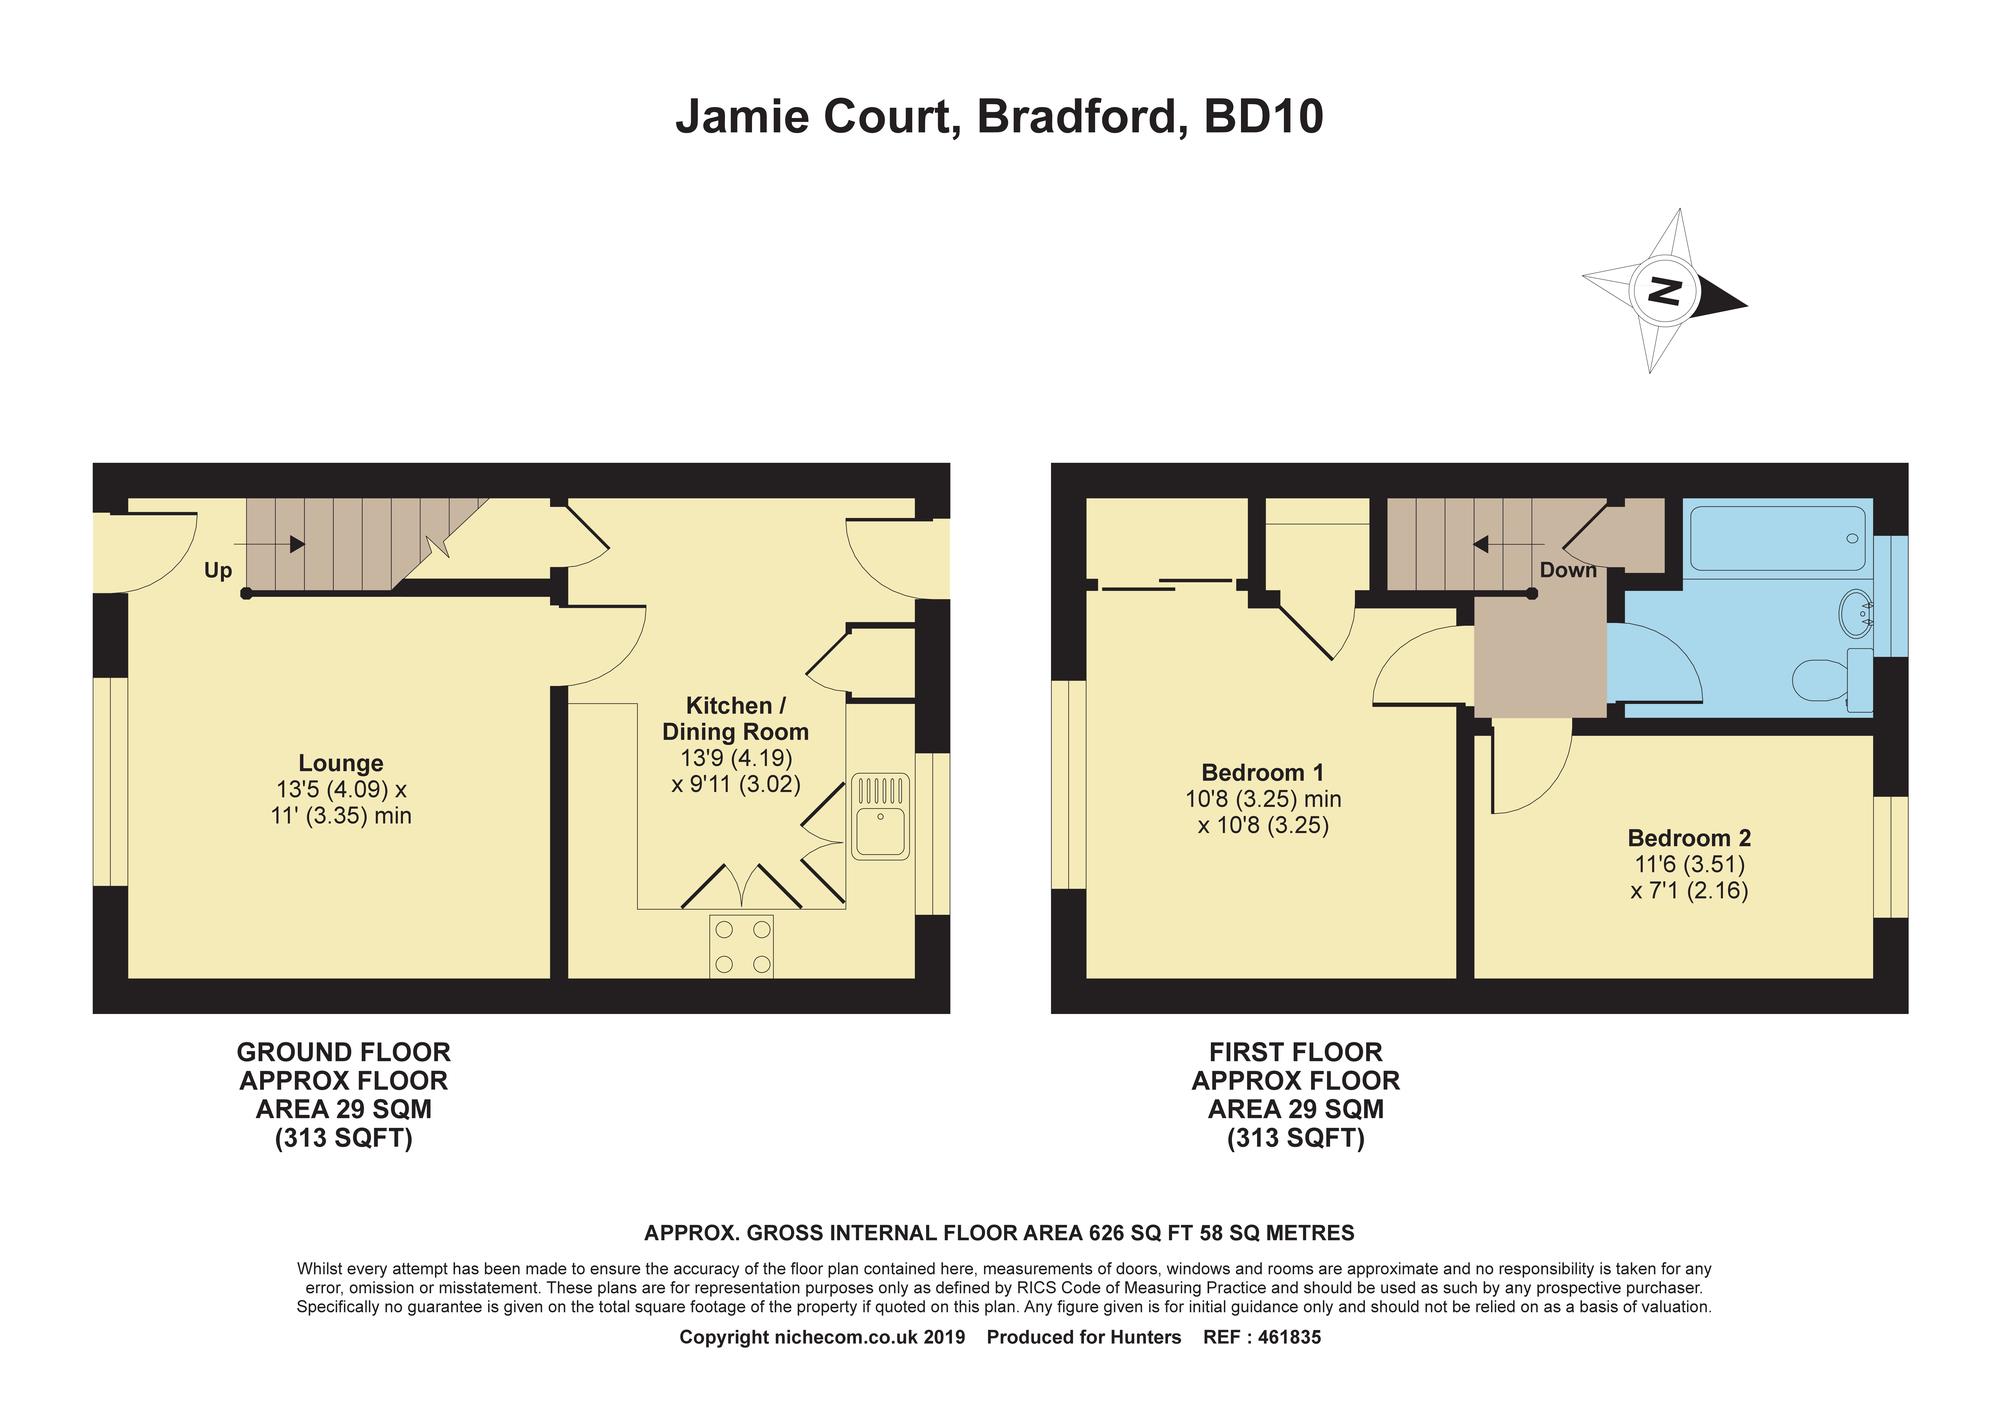 2 Bedrooms Semi-detached house for sale in Jamie Court, Bradford BD10